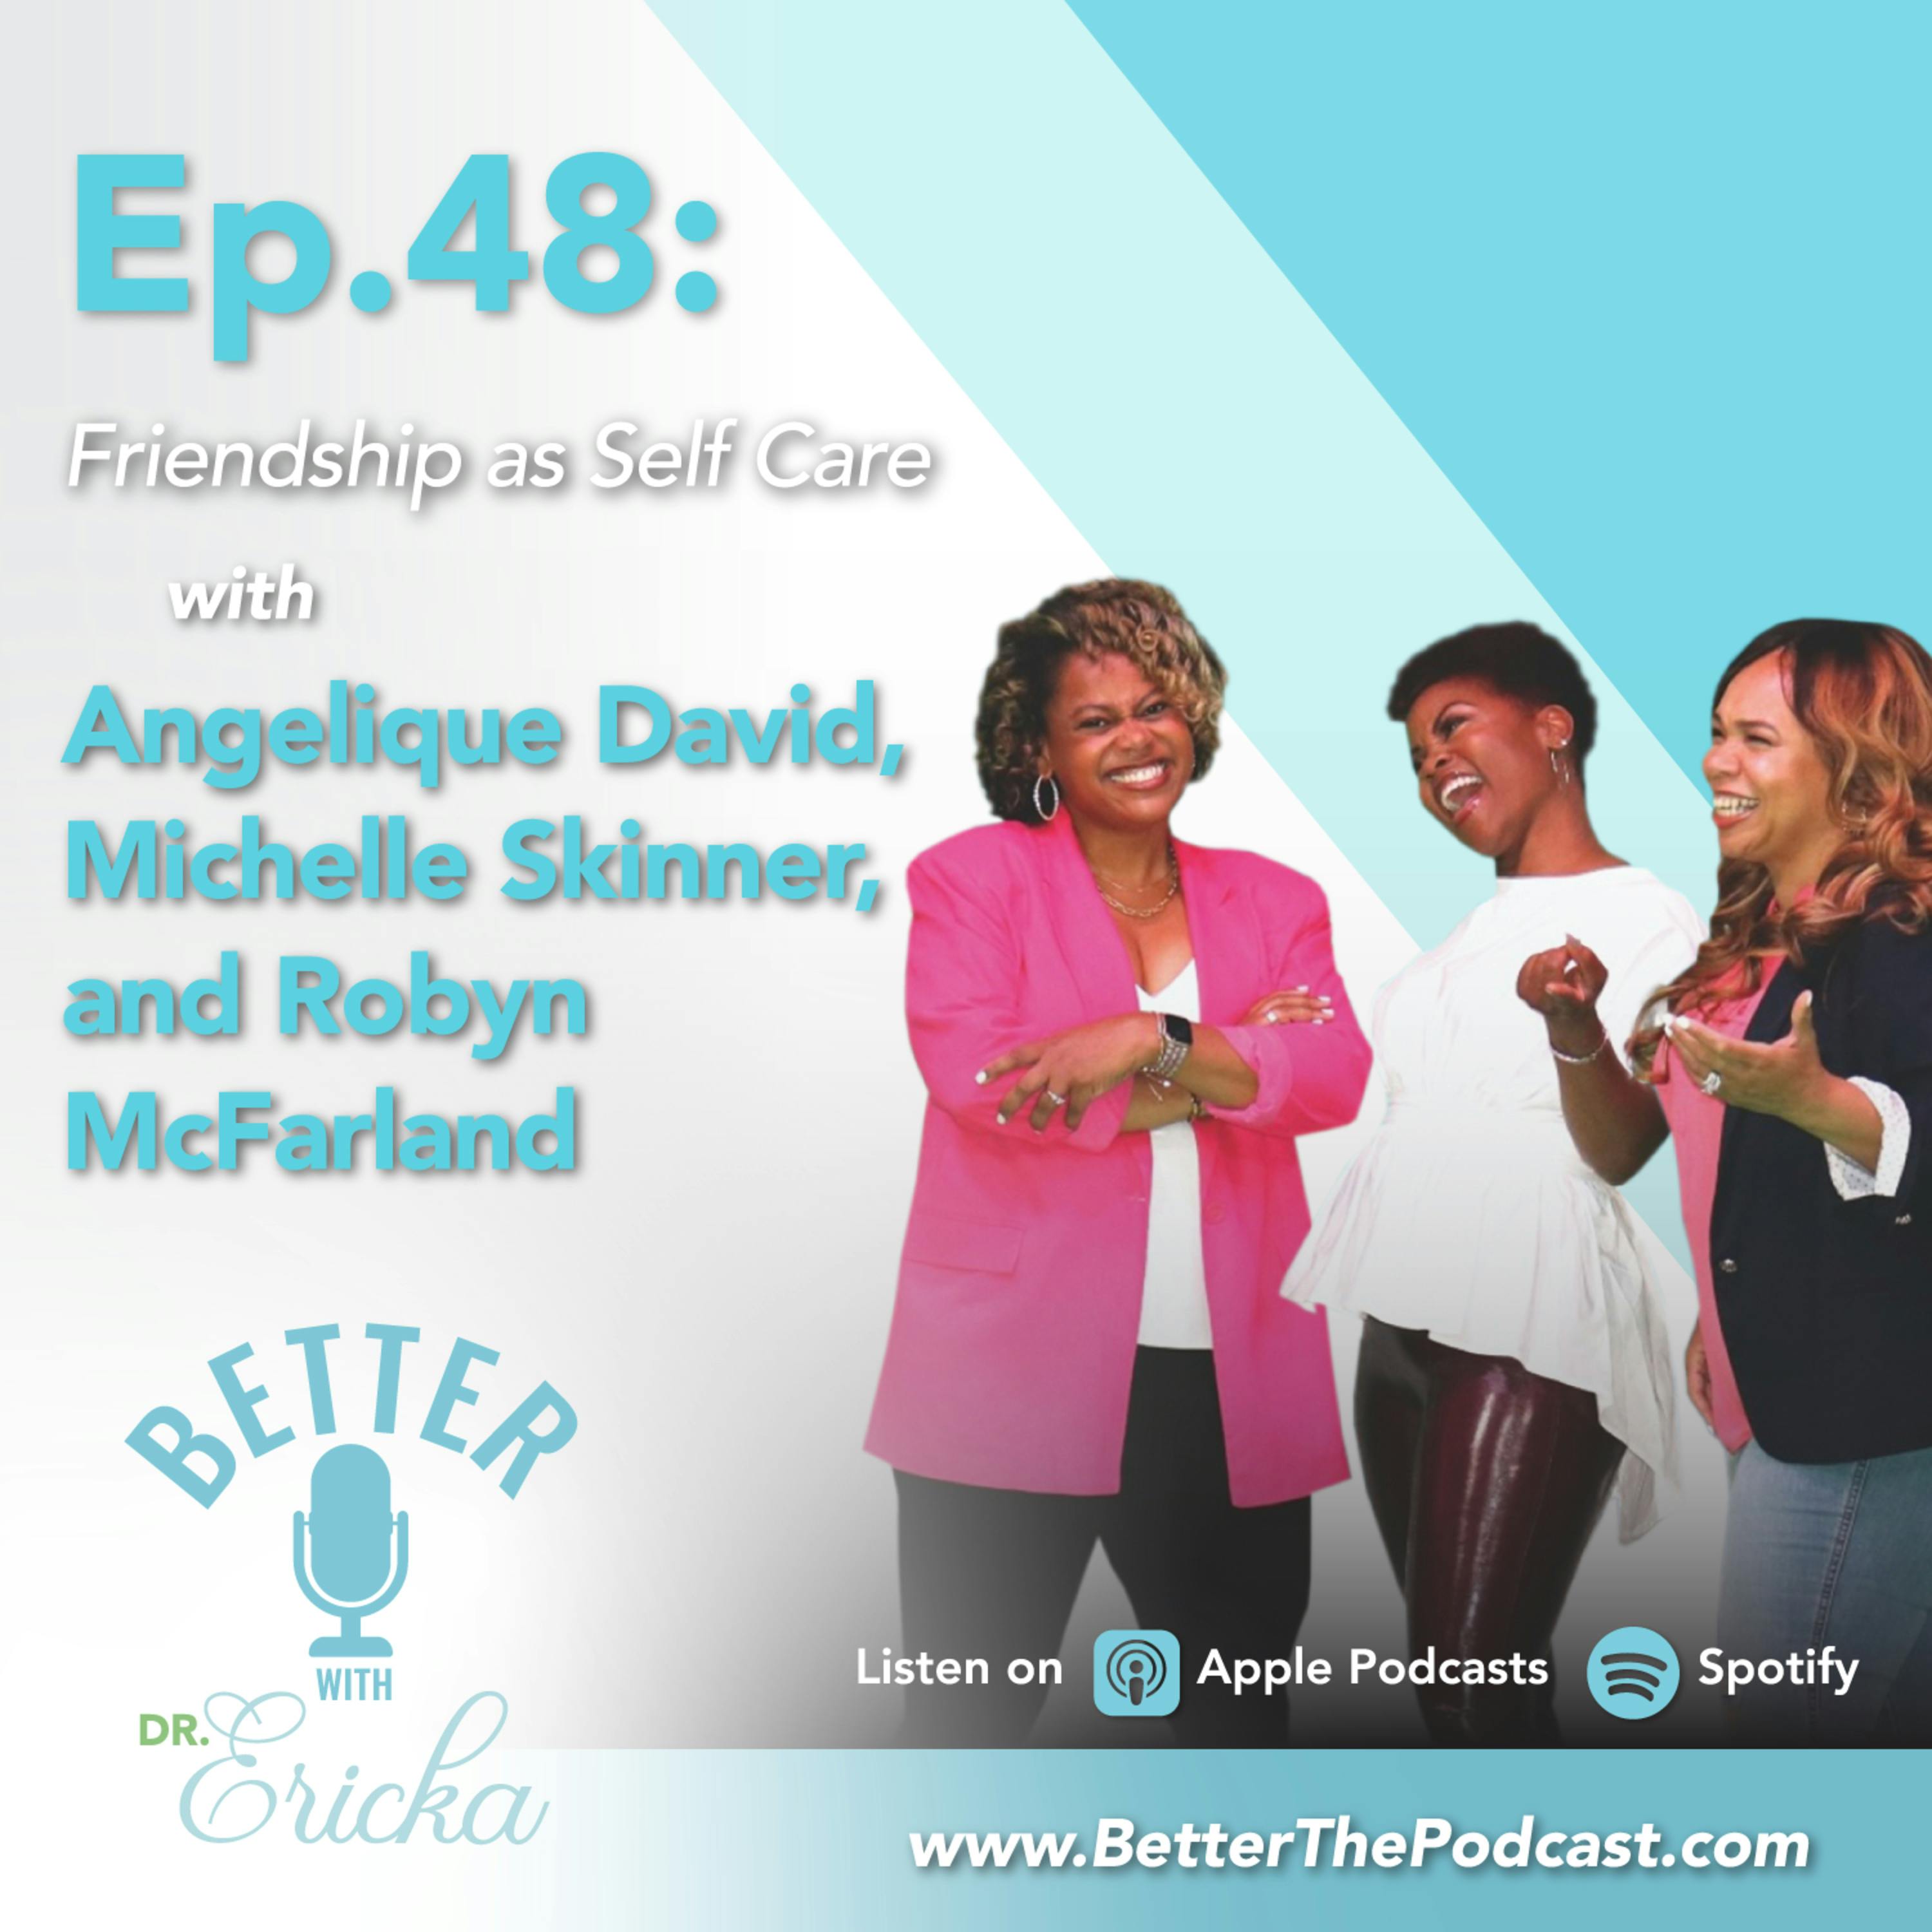 Friendship as Self Care with Angelique David, Michelle Skinner, and Robyn McFarland